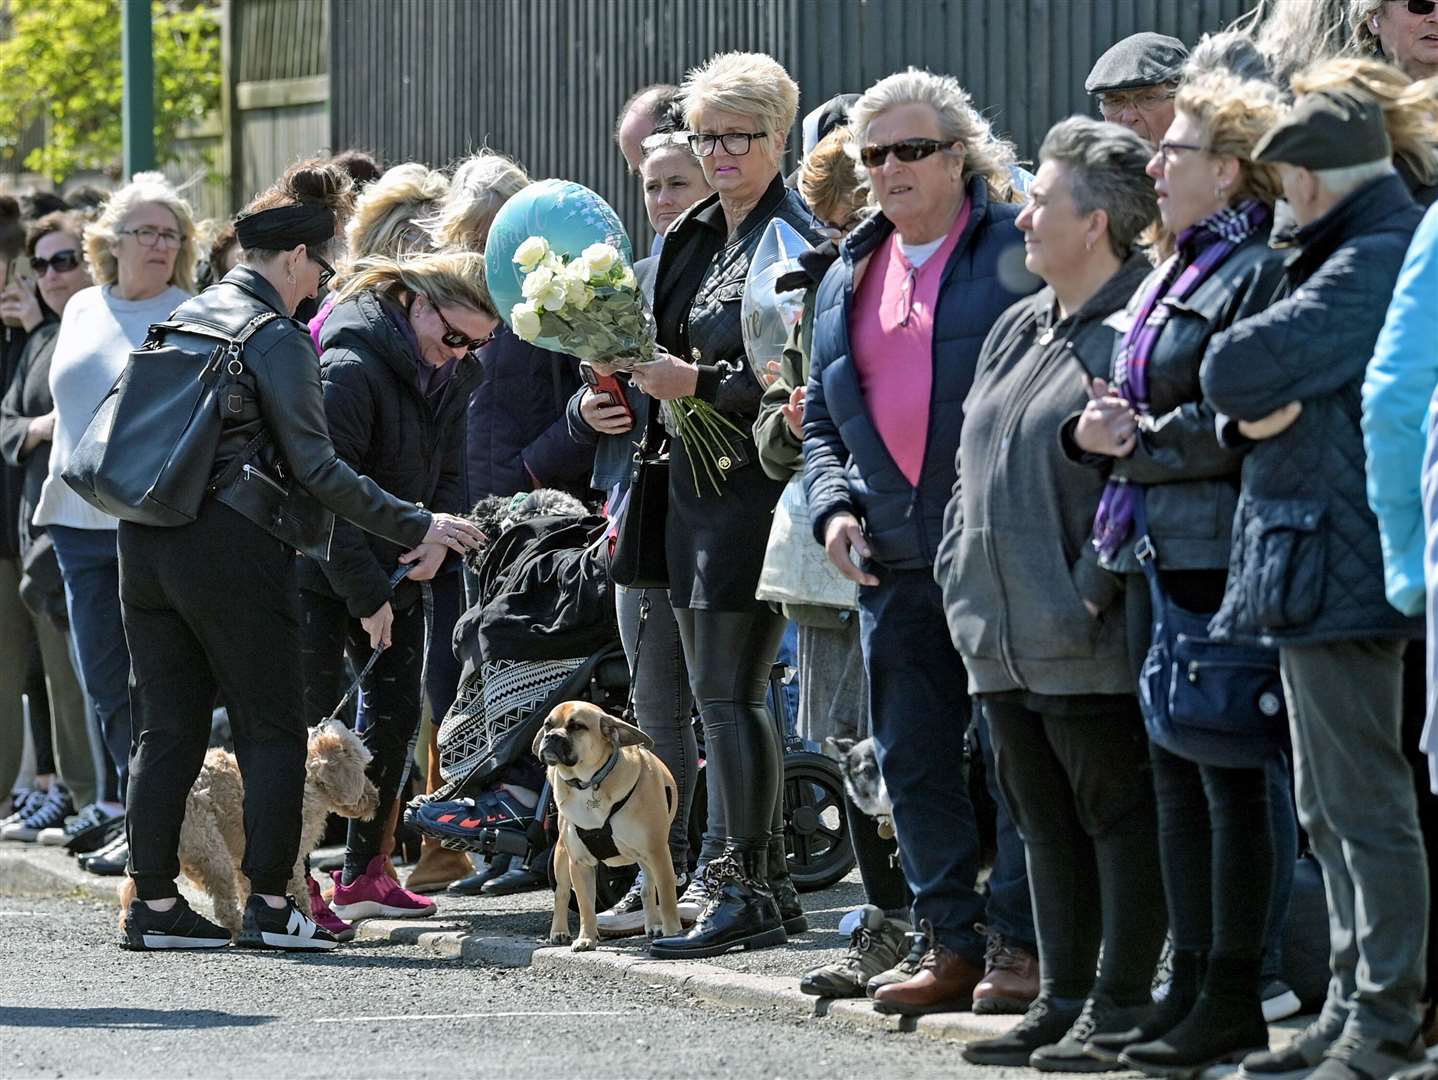 Scores of fans lined the streets for Paul O’Grady’s funeral procession. Picture: Stuart Brock